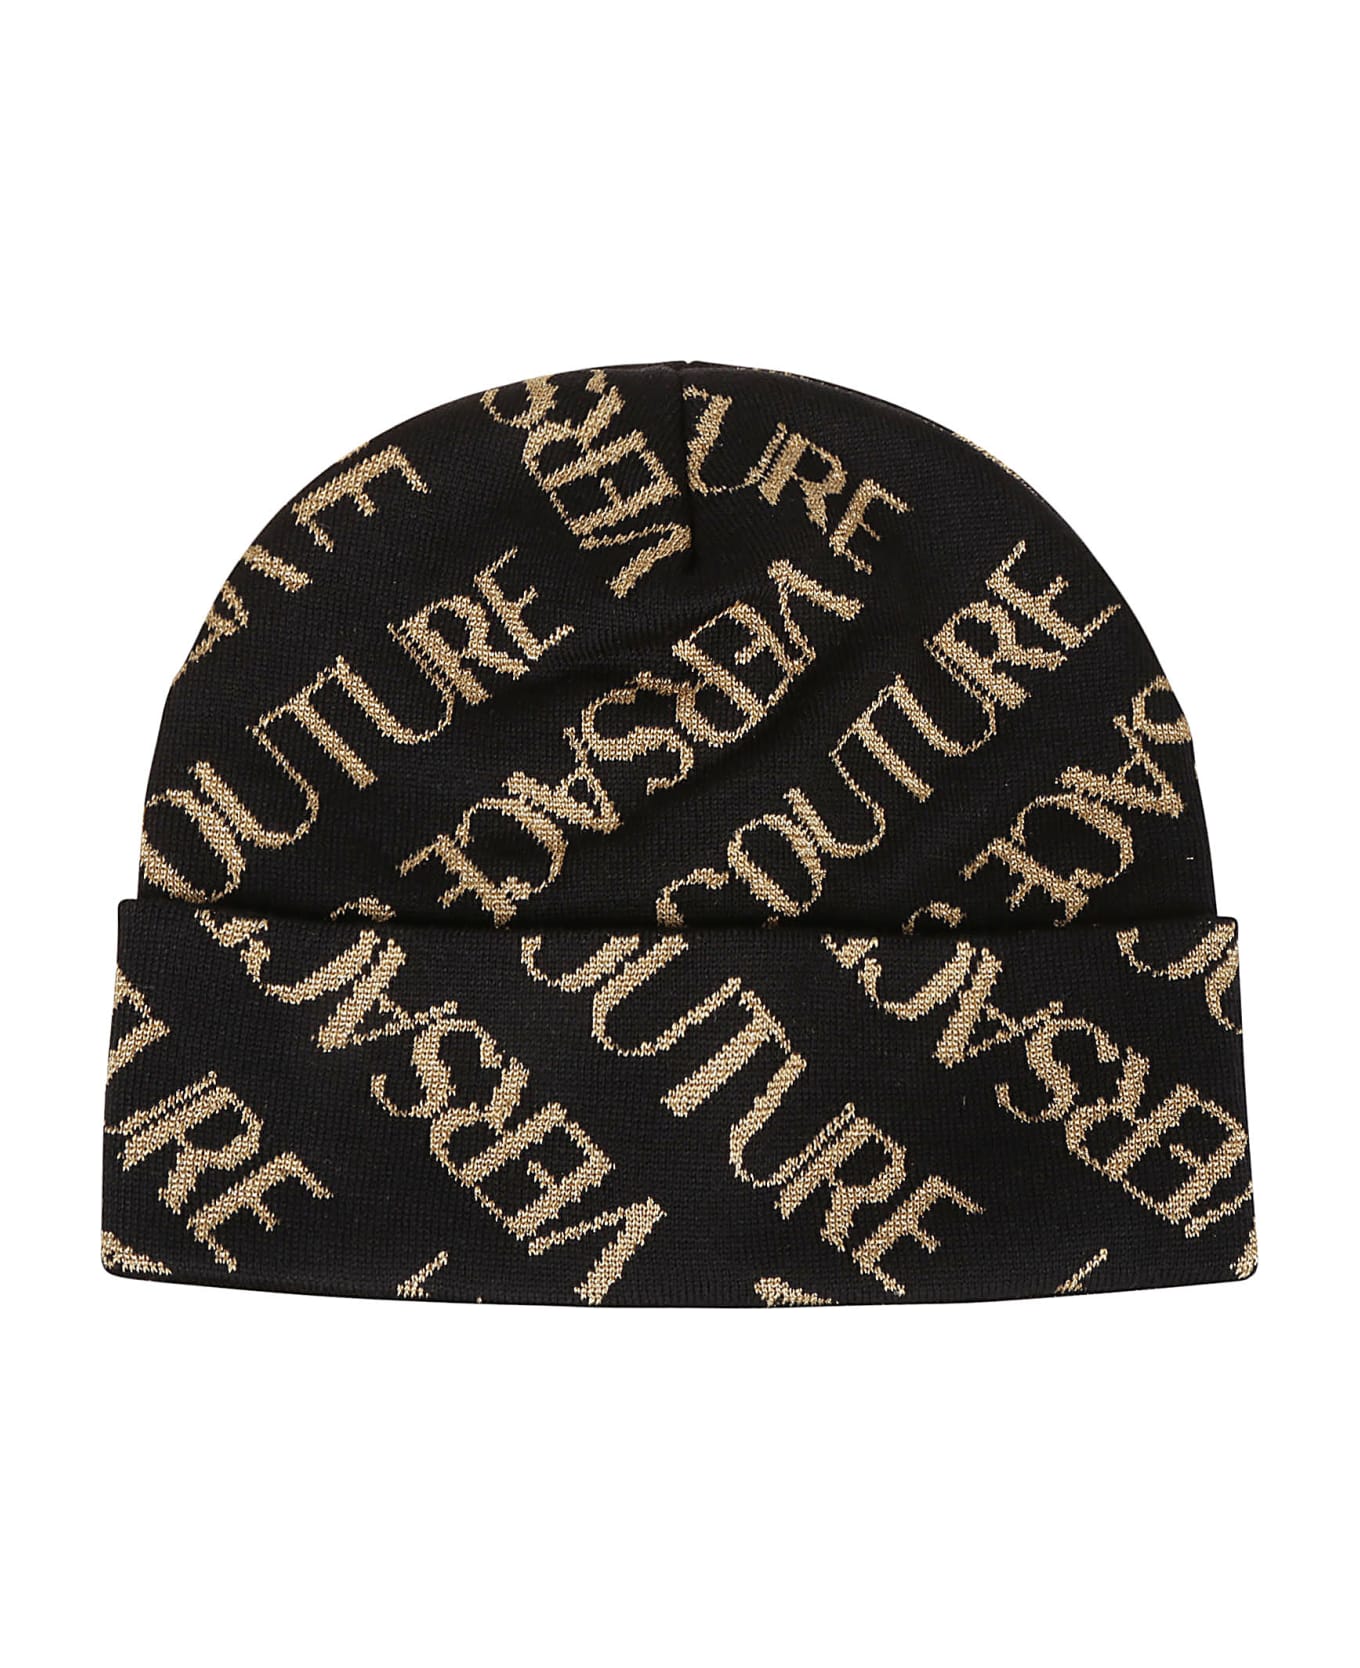 Versace Jeans Couture Logo All Over Medium Beanie - Black/gold